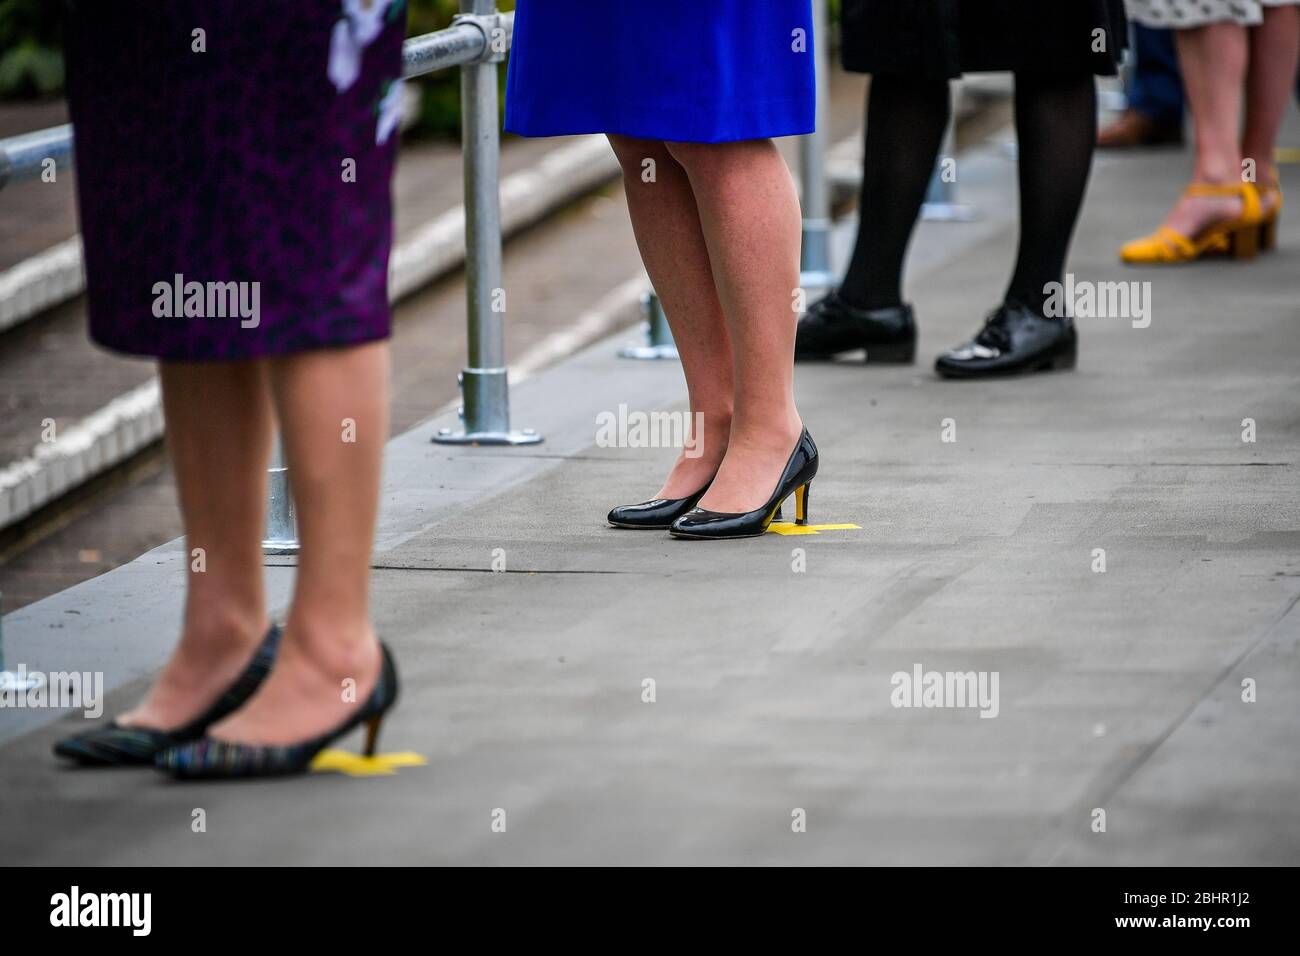 EMBARGOED TO 1700 MONDAY APRIL 27 NHS staff stand on yellow crosses taped to the floor to indicate a safe social distance during the formal opening of Bristol Nightingale Hospital, which is located at the University of the West of England. Stock Photo